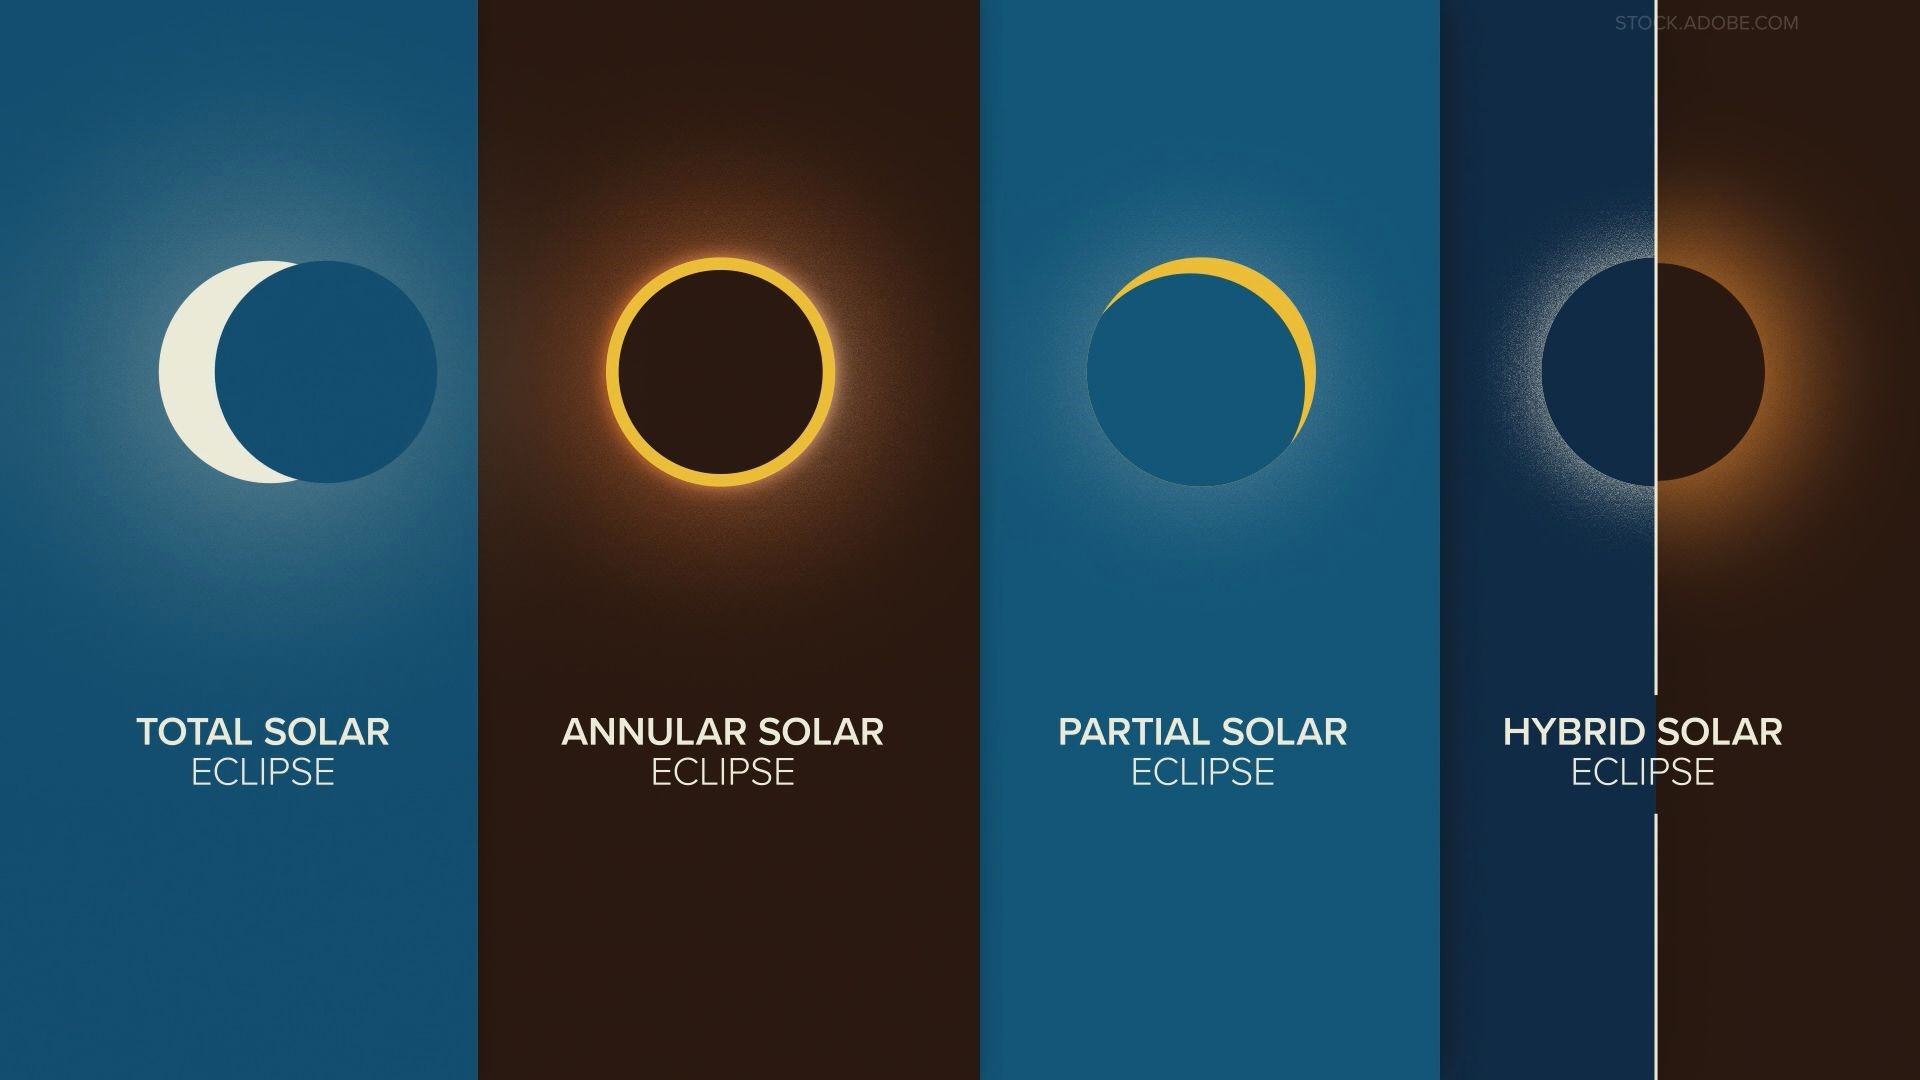 April's event is just one of four types of solar eclipses.  We take a look at each one.